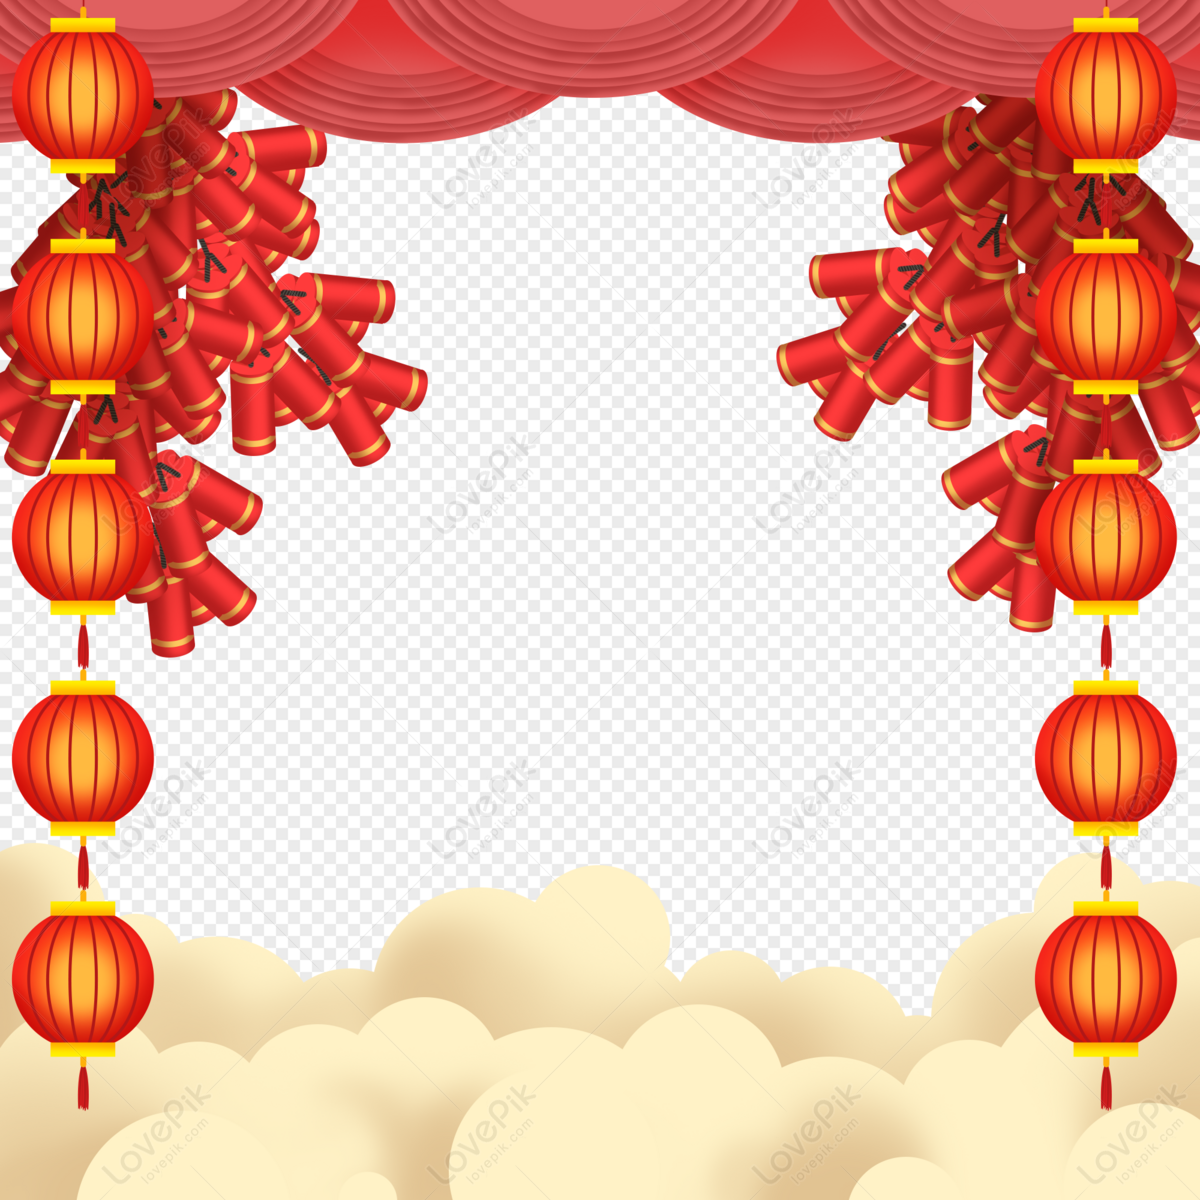 New Year Chinese Style Border PNG Hd Transparent Image And Clipart Image  For Free Download - Lovepik | 400480354